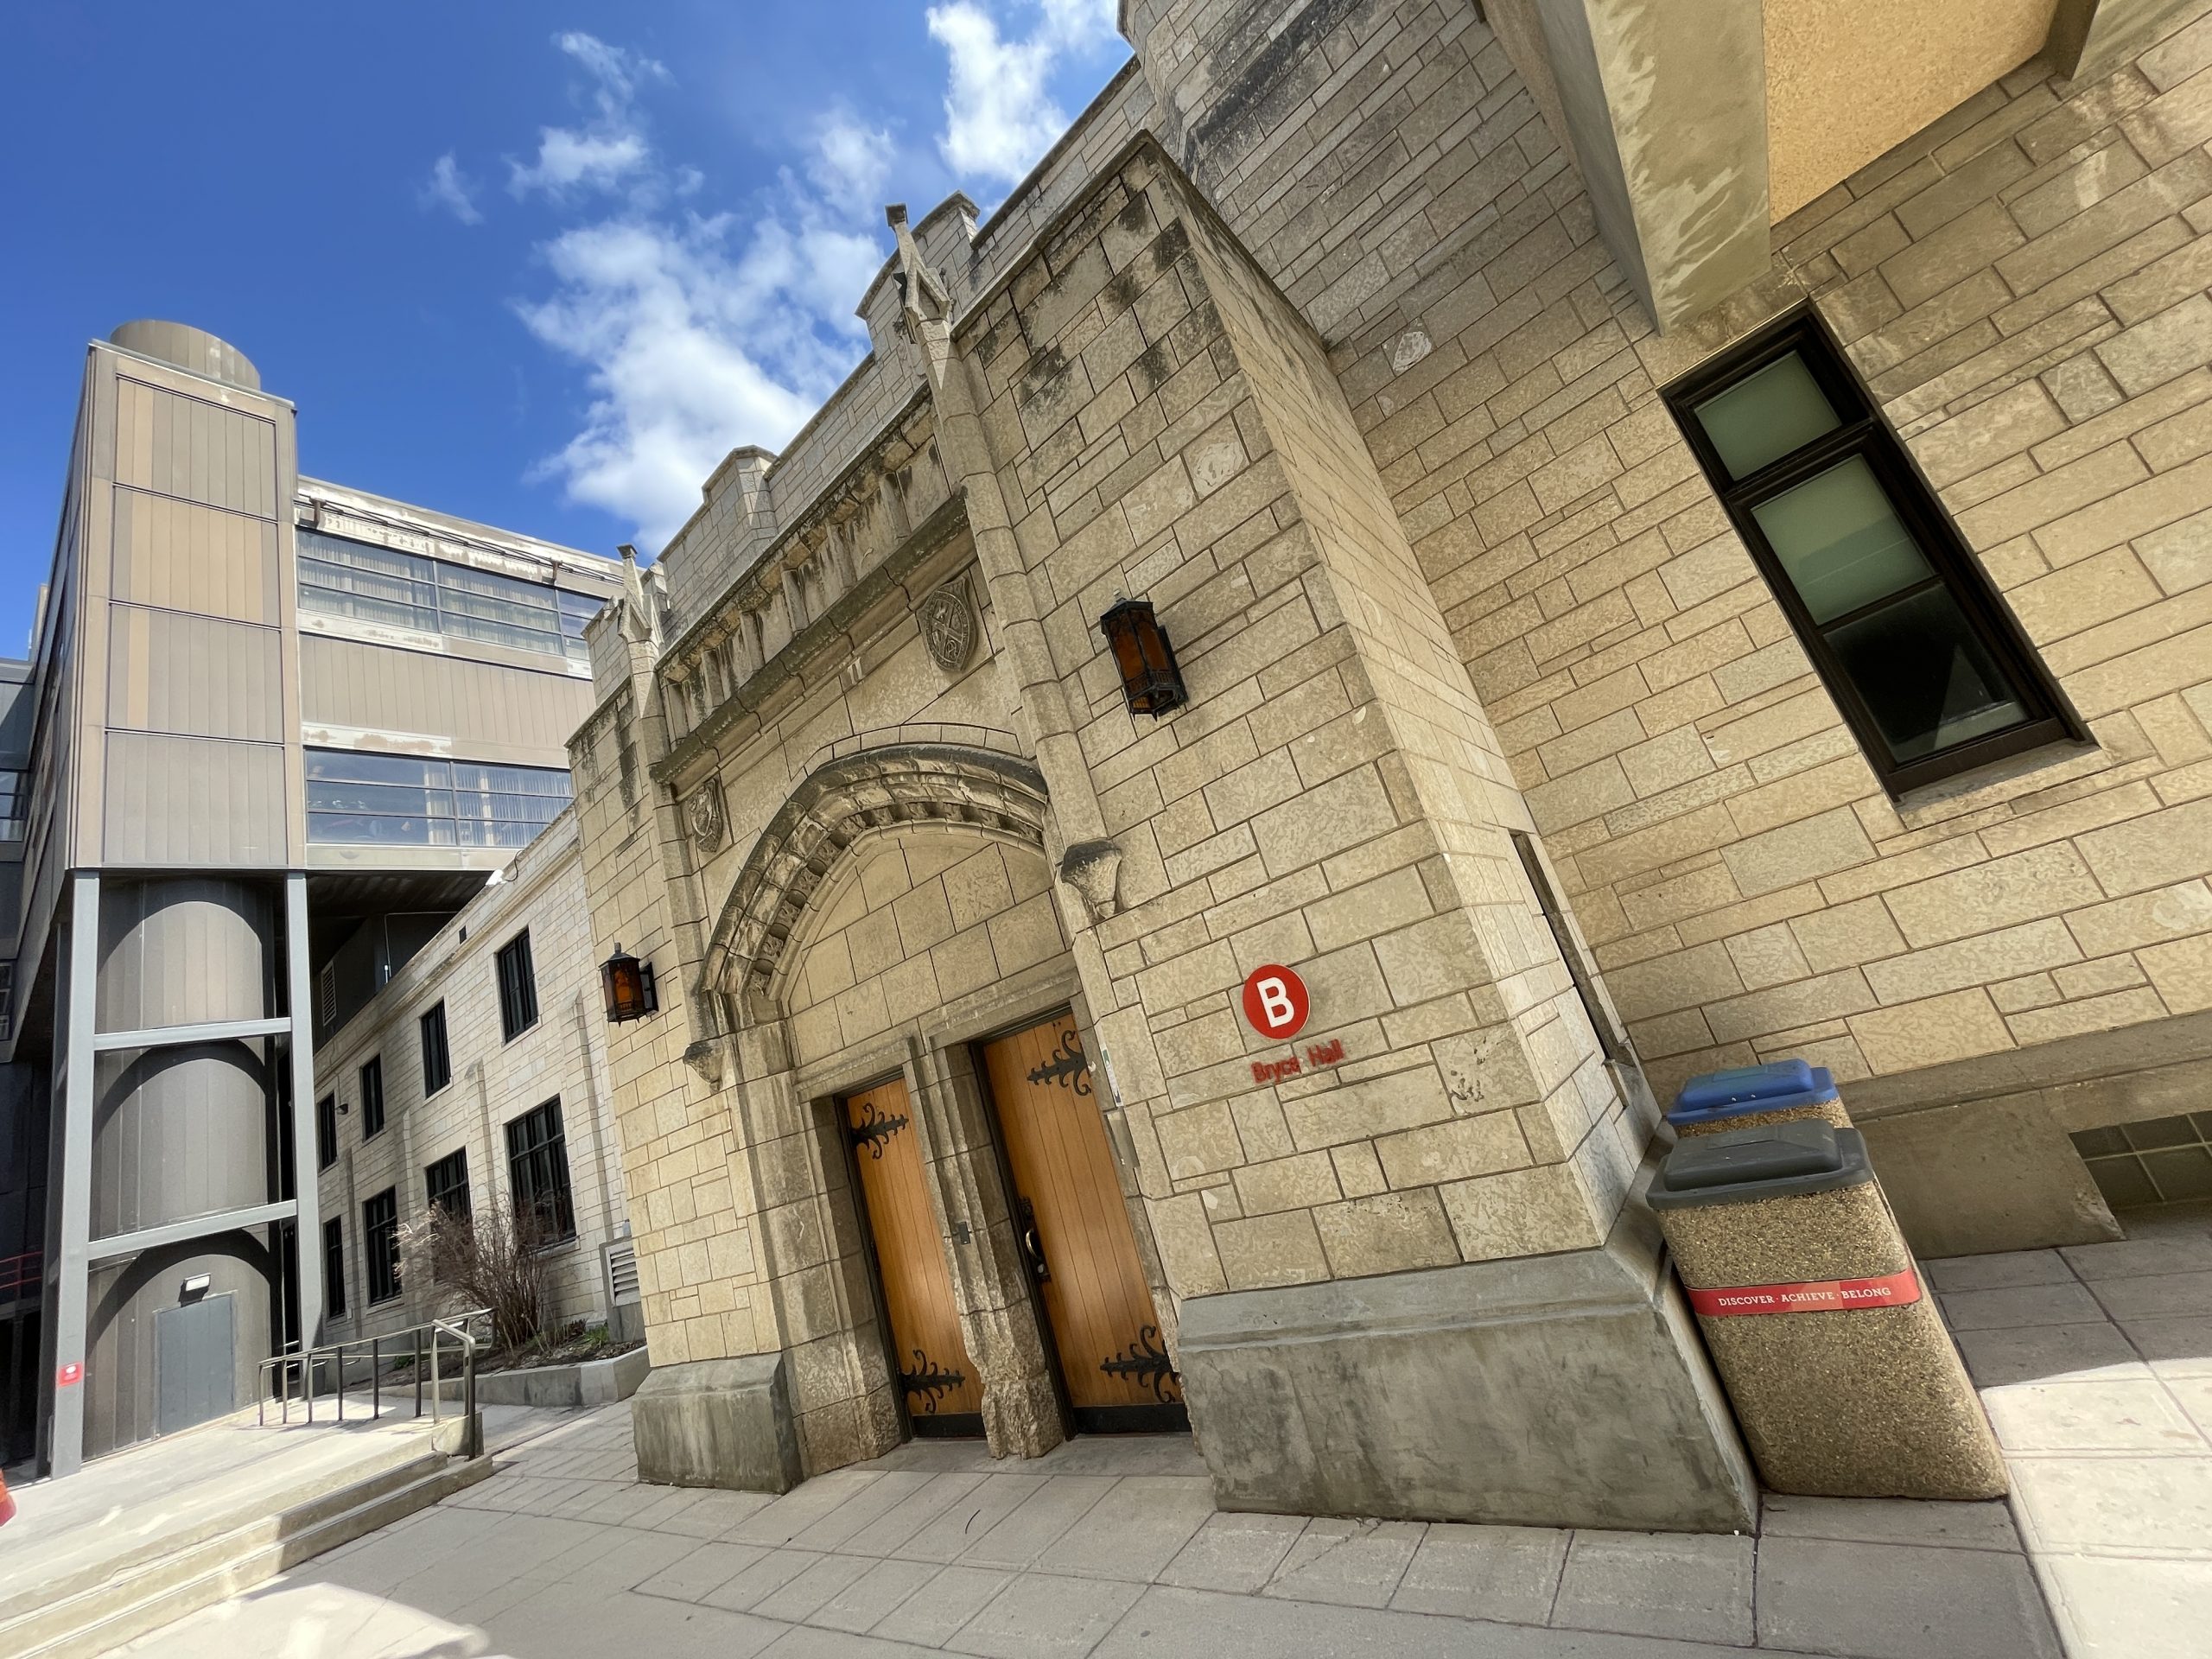 The Tyndall stone exterior and double wooden doors of University of Winnipeg's Bryce Hall in the foreground, with the tubular stairwell of Centennial Hall visible in the background.